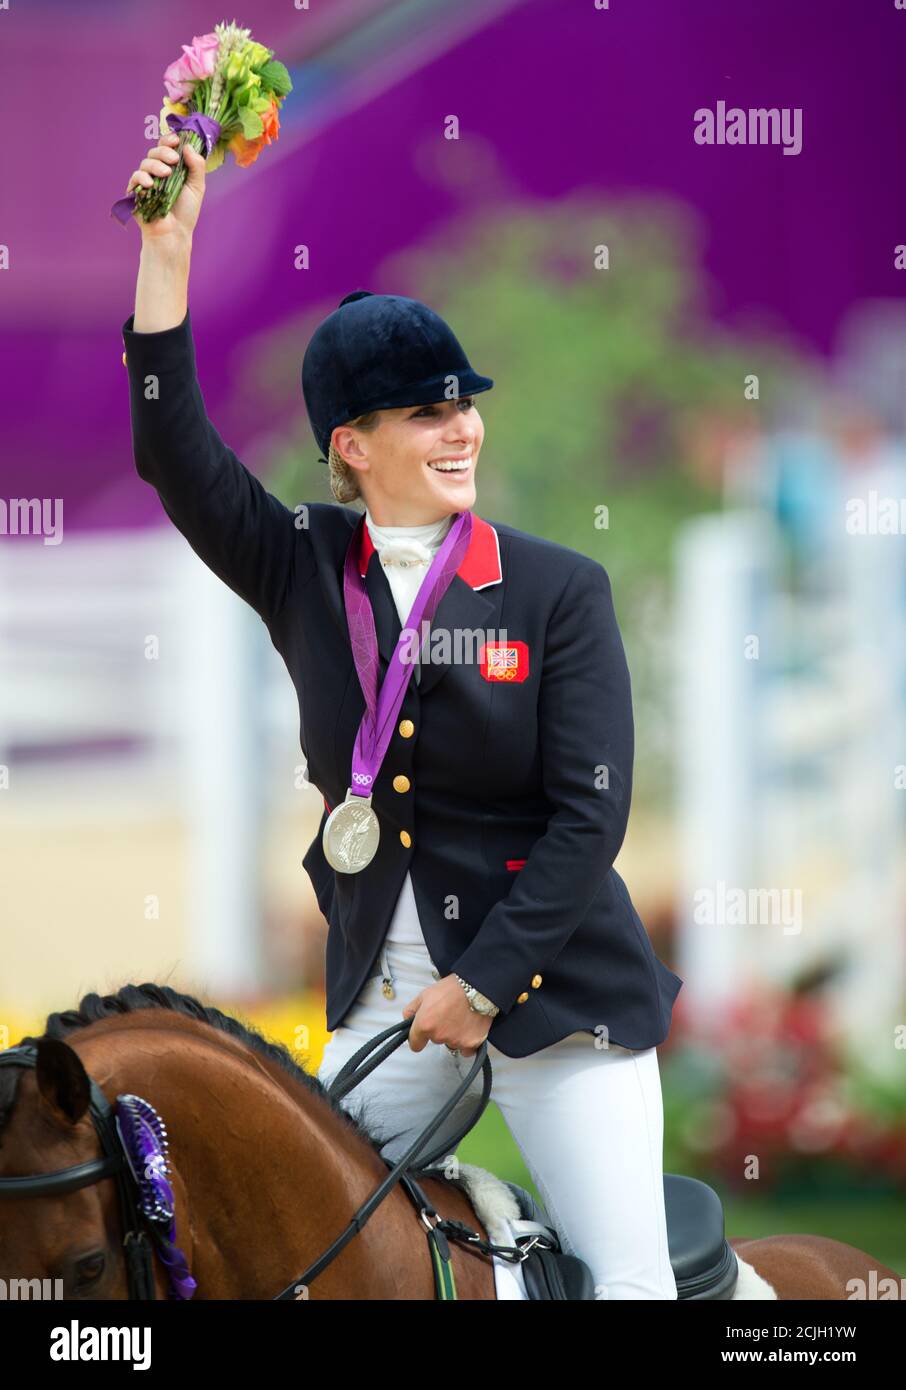 Zara Phillips The 2012 London Olympic Games, Equestrian Eventing, Greenwich Park, Britain - 31 Jul 2012  PICTURE CREDIT : © MARK PAIN /ALAMY Stock Photo